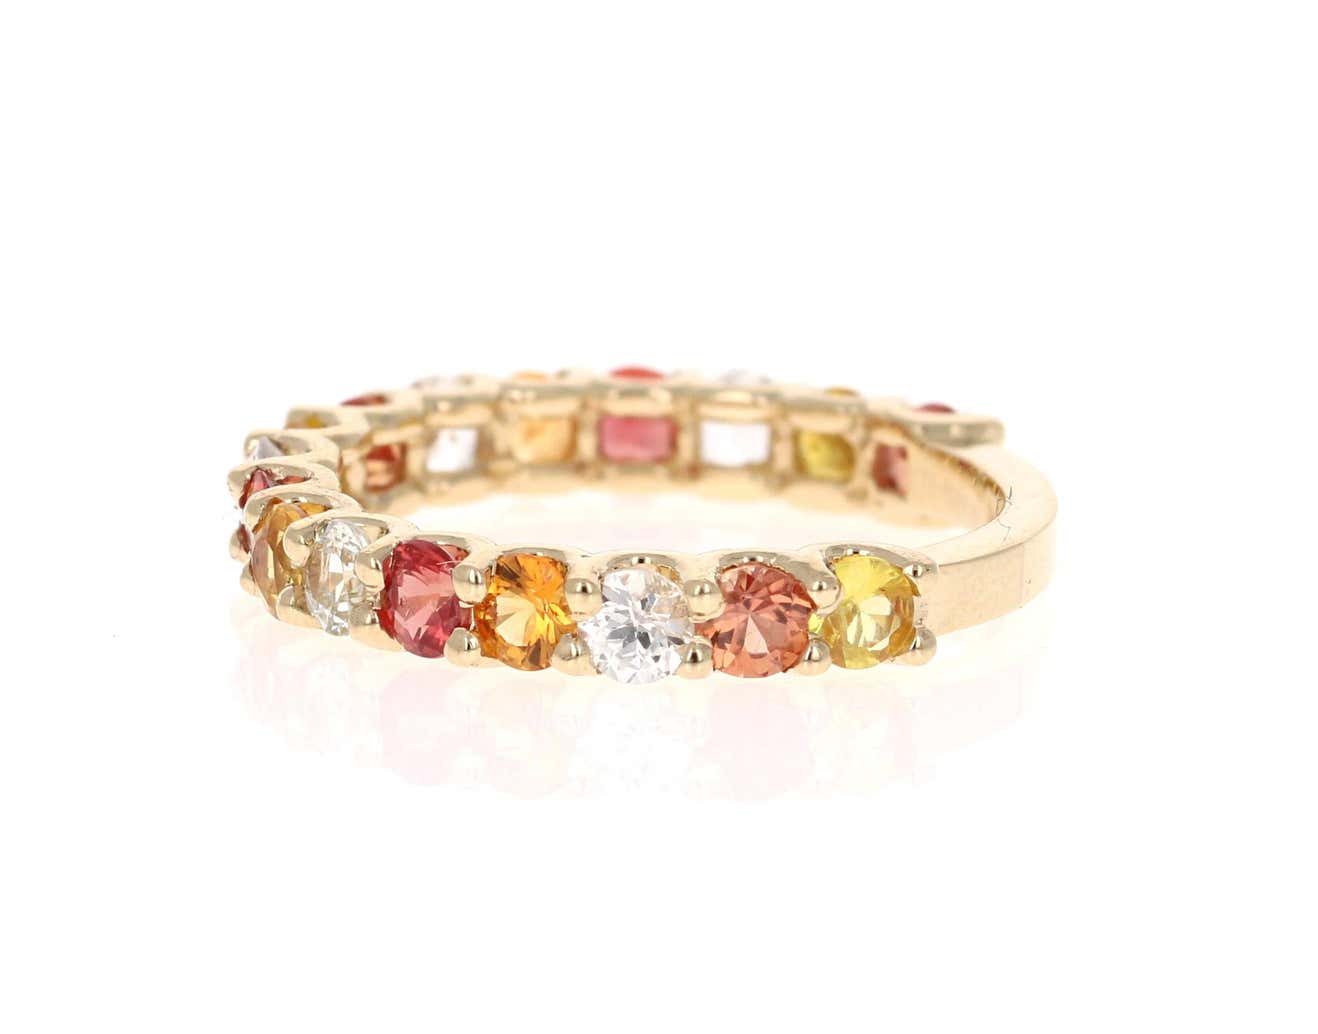 2.92 Carat Multicolored Sapphire 14 Karat Yellow Gold Stackable Band